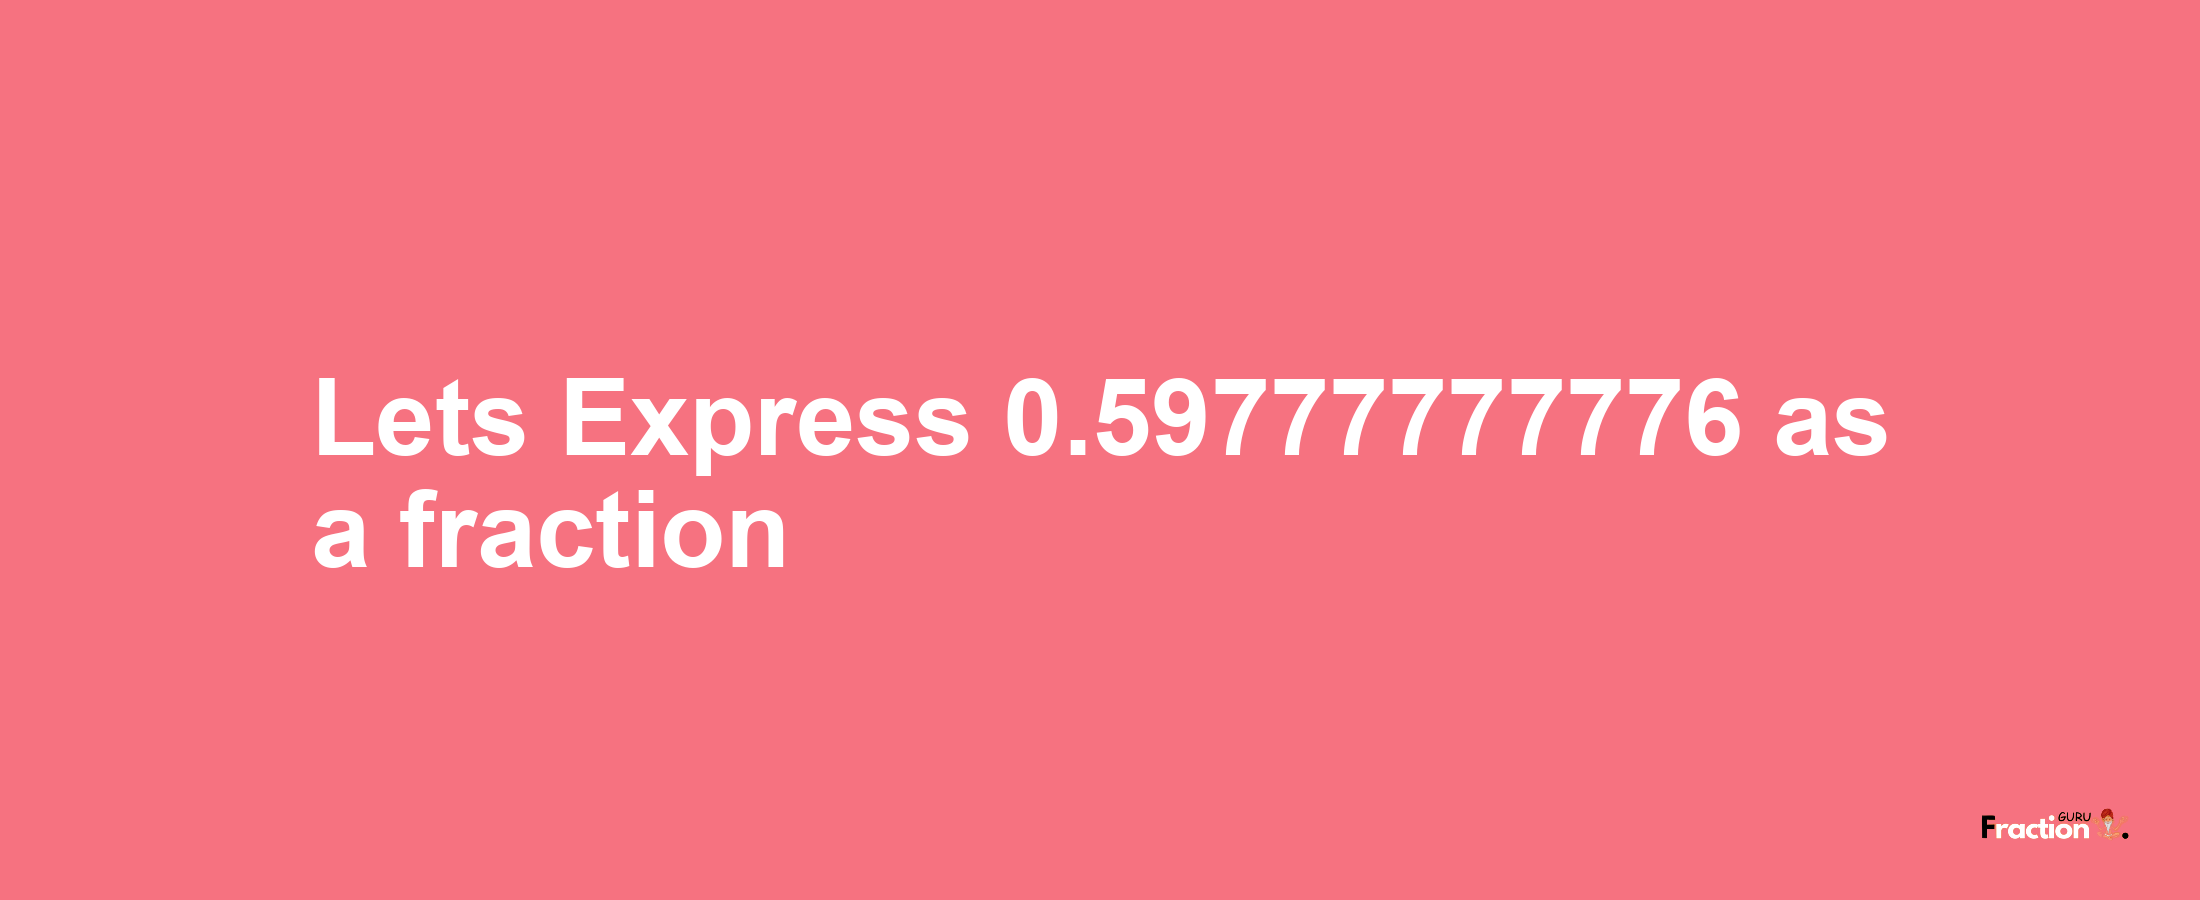 Lets Express 0.59777777776 as afraction